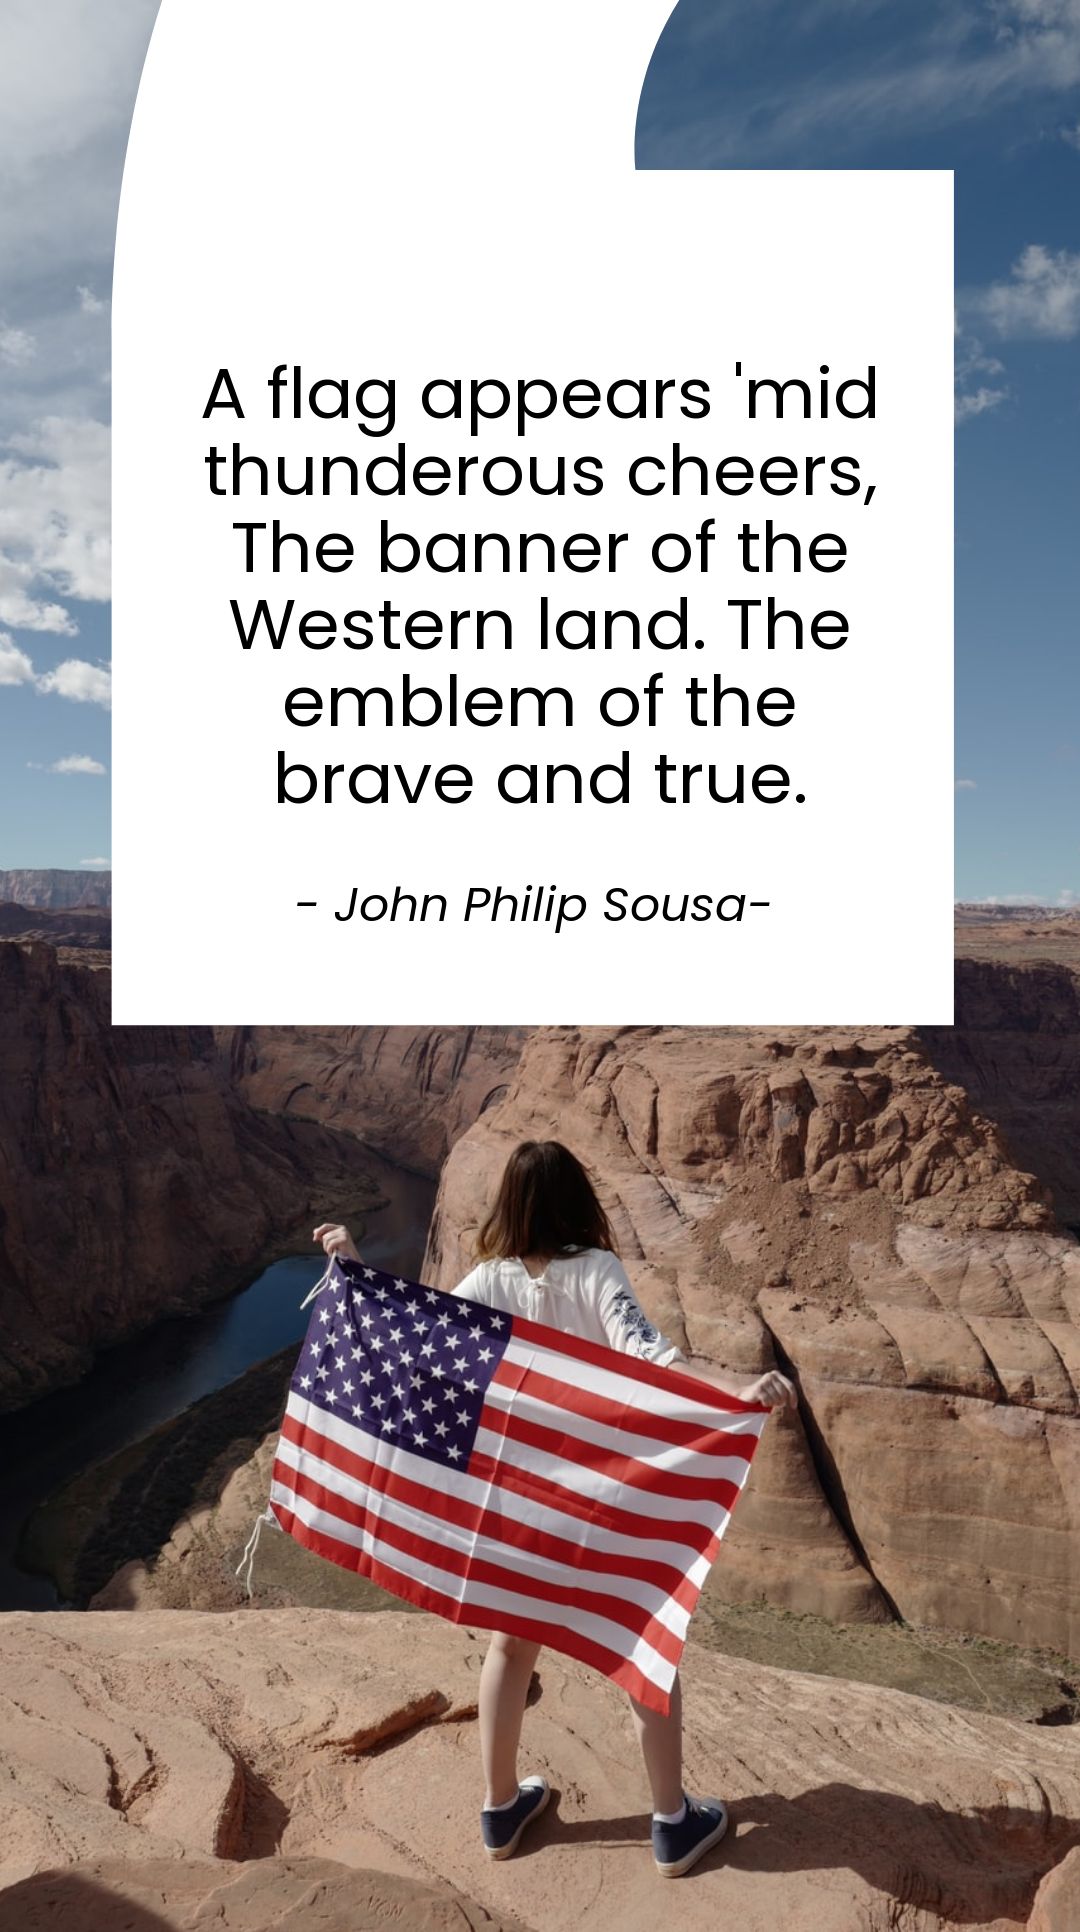 John Philip Sousa - A flag appears 'mid thunderous cheers, The banner of the Western land. The emblem of the brave and true.